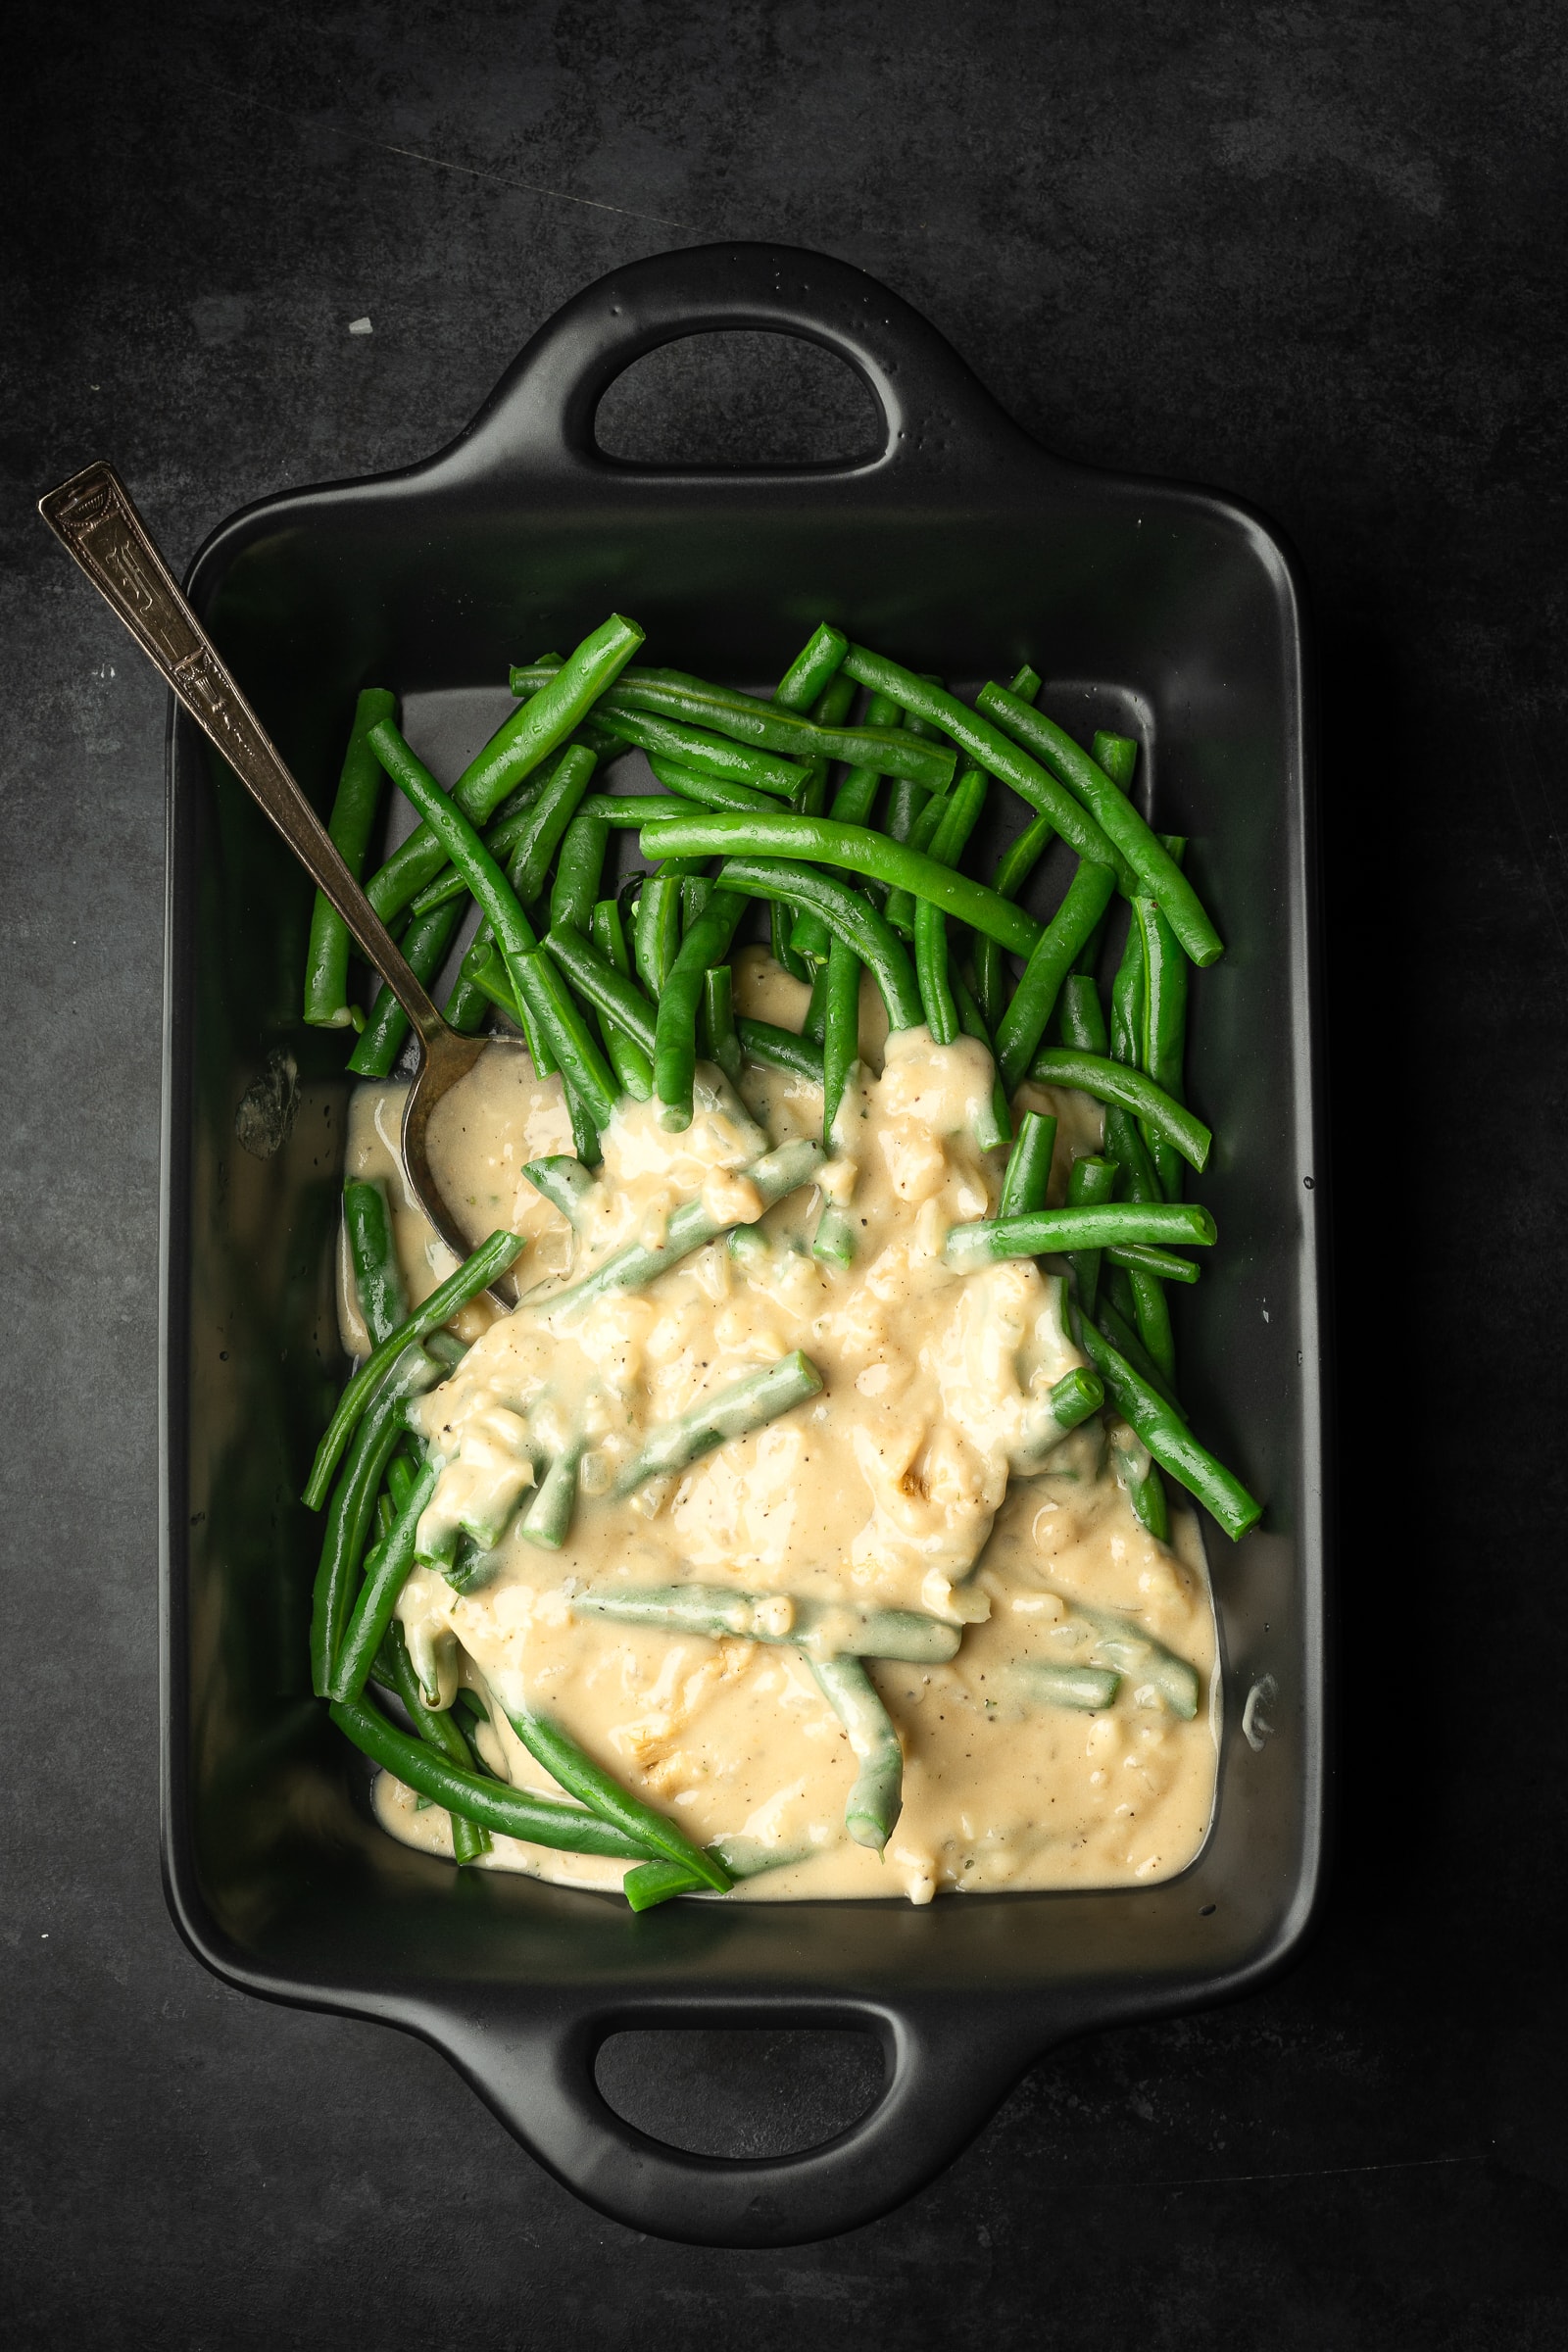 Green beans being mixed with creamy mixture in a black casserole dish.